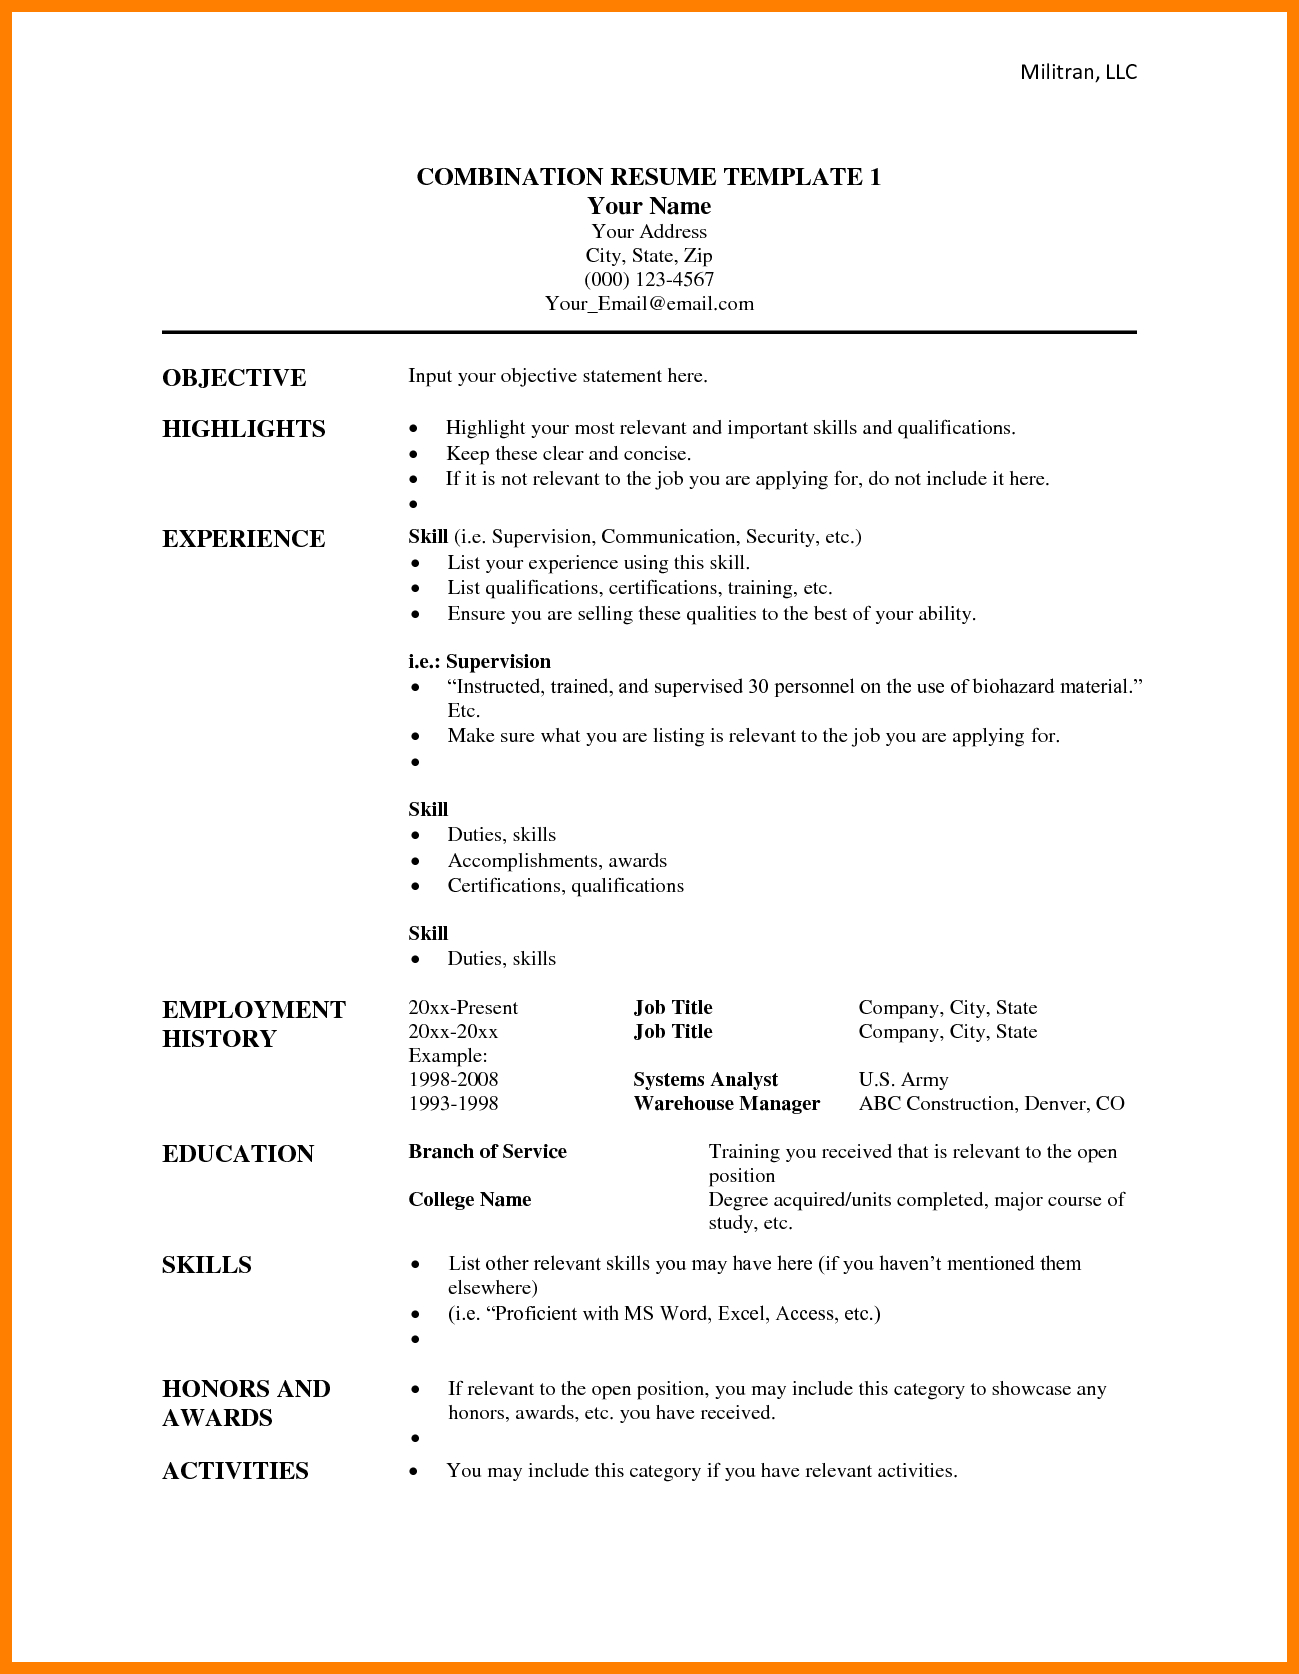 8+ Functional Resume Template Microsoft Word | Reptile Shop With Regard To Combination Resume Template Word